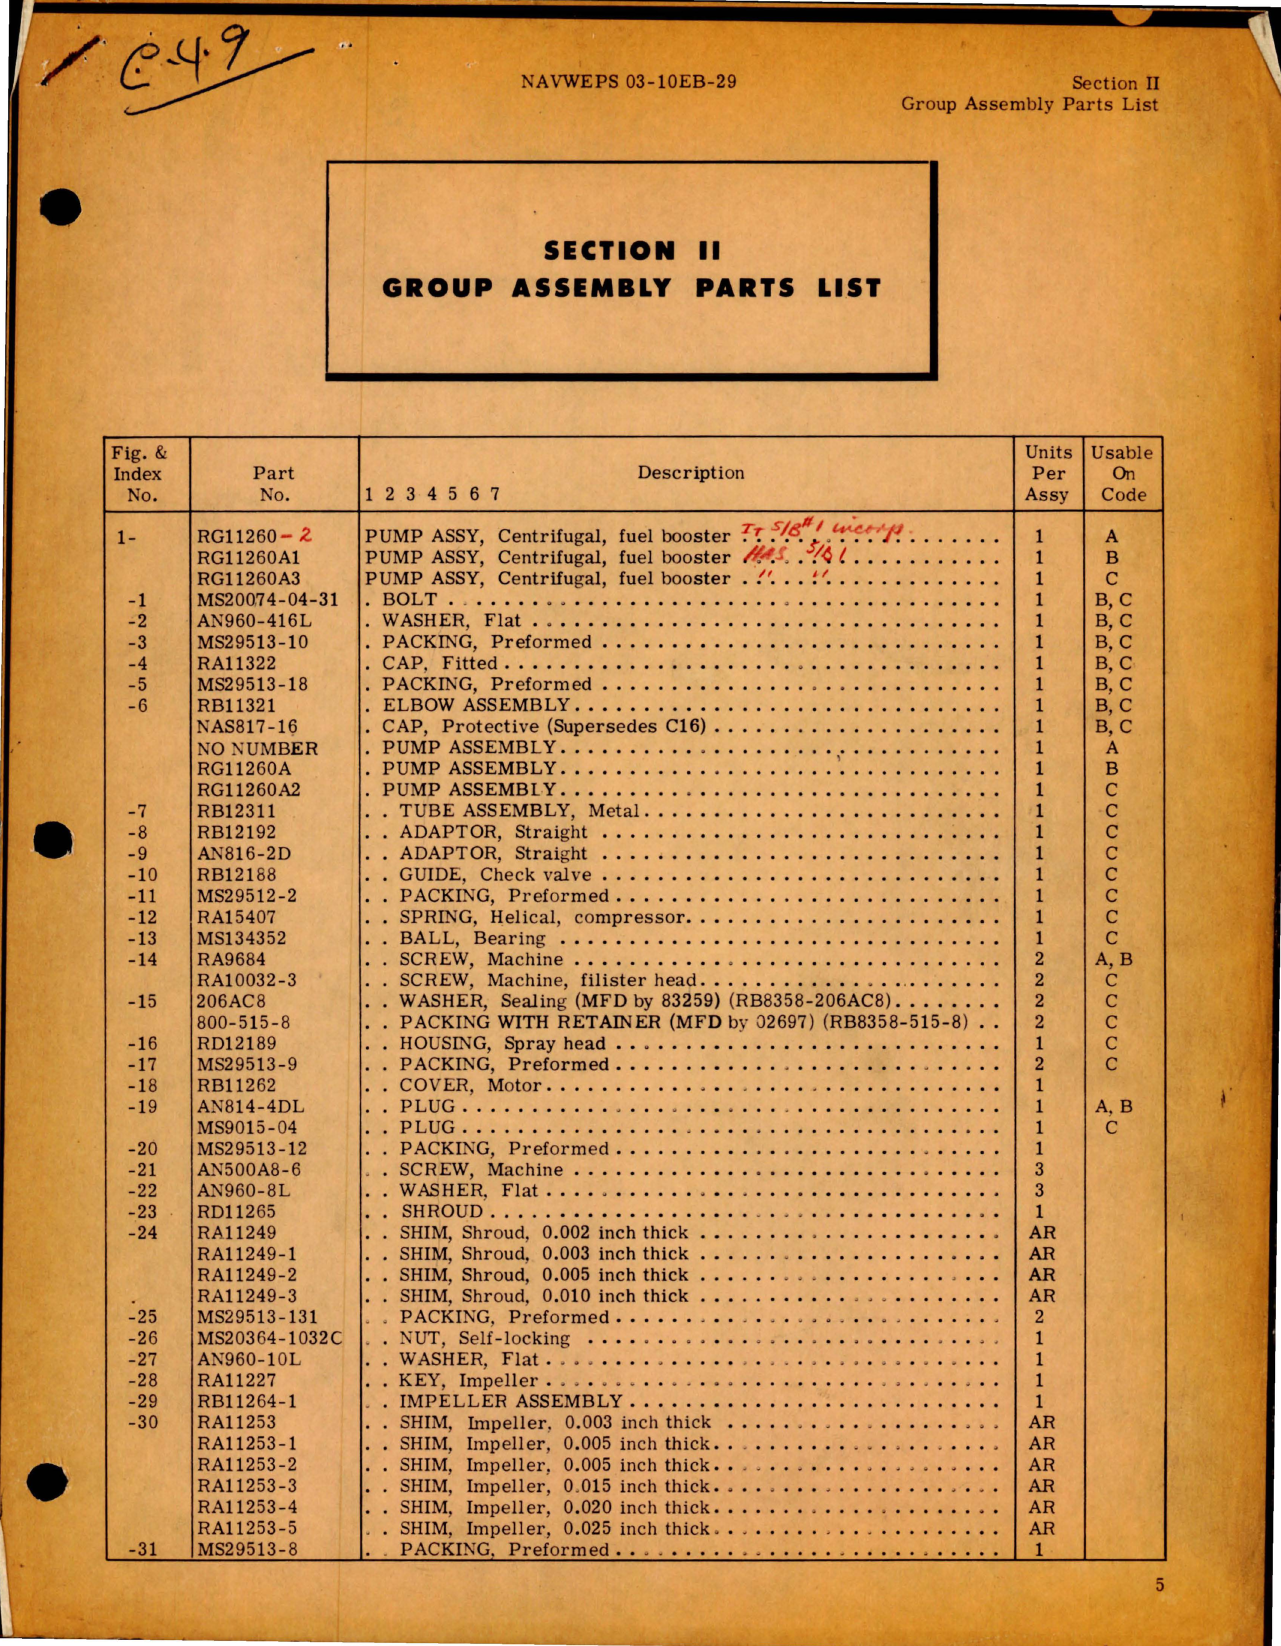 Sample page 1 from AirCorps Library document: Parts List for Pump Assembly